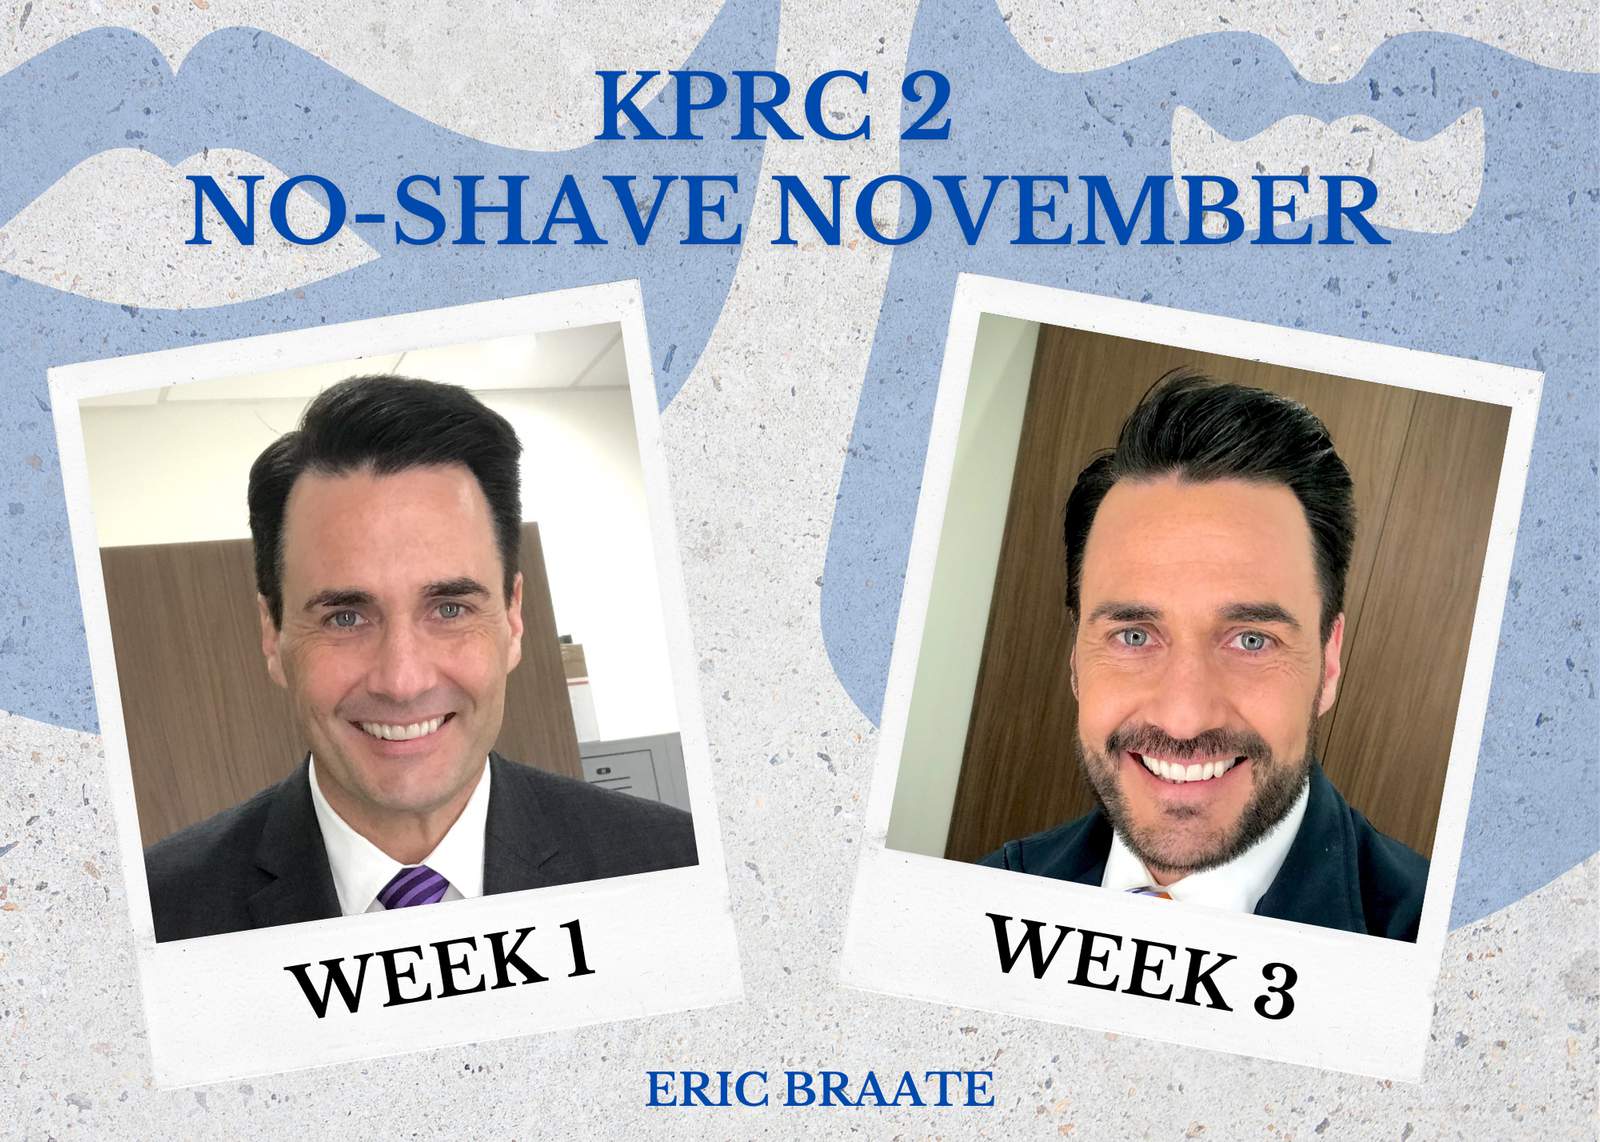 Can you recognize our KPRC 2 men? Check out their No-Shave November progress pics